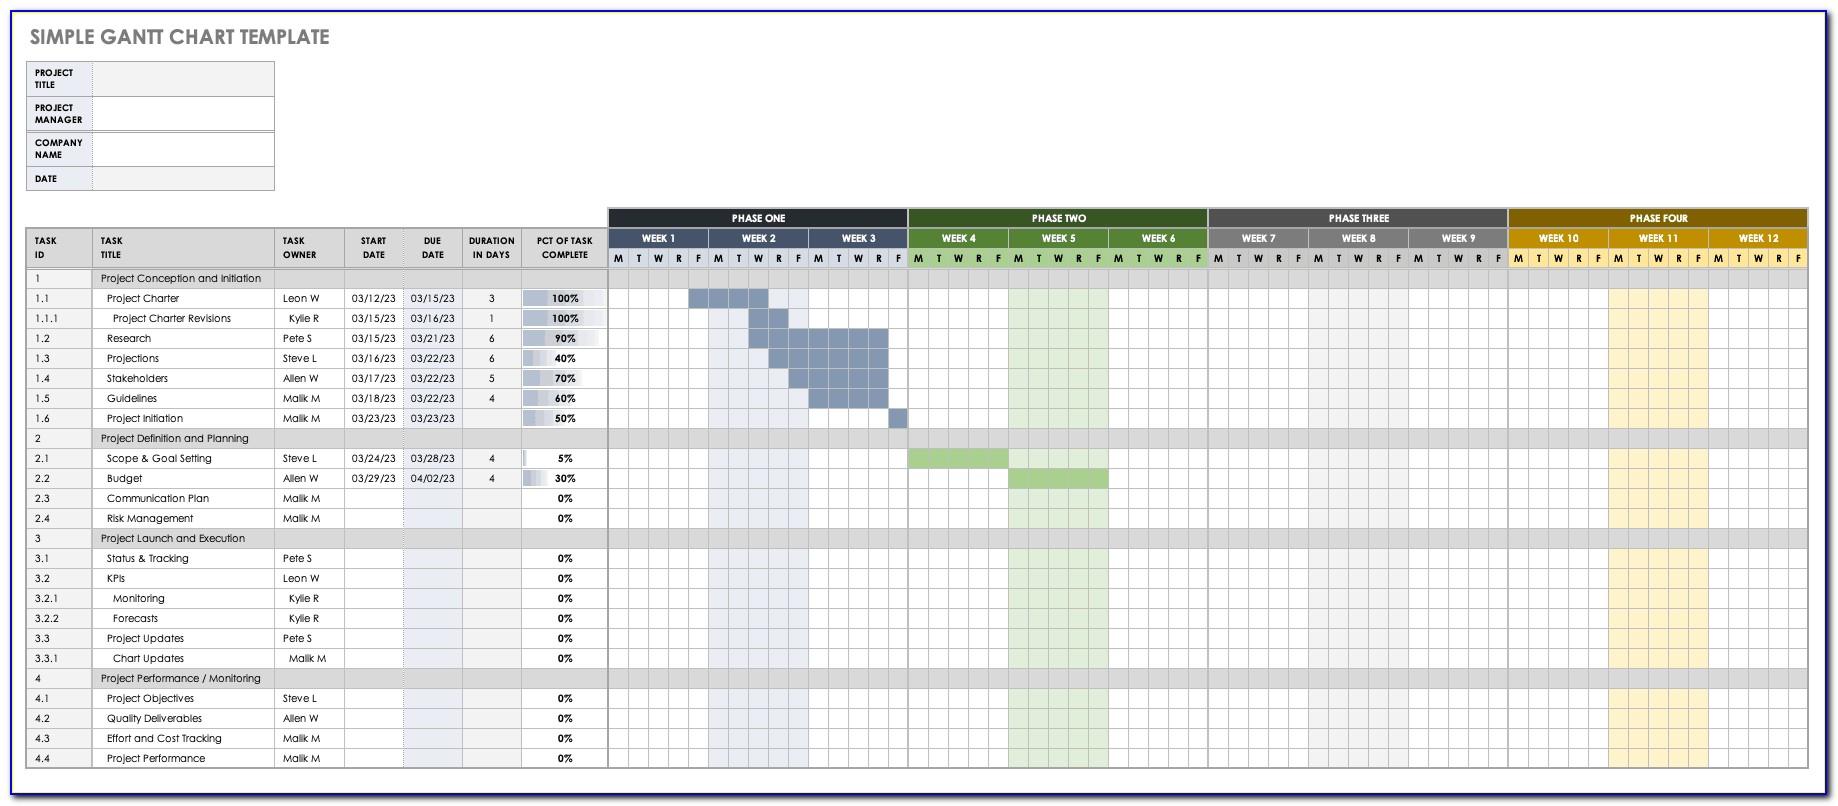 It Capacity Planning Template